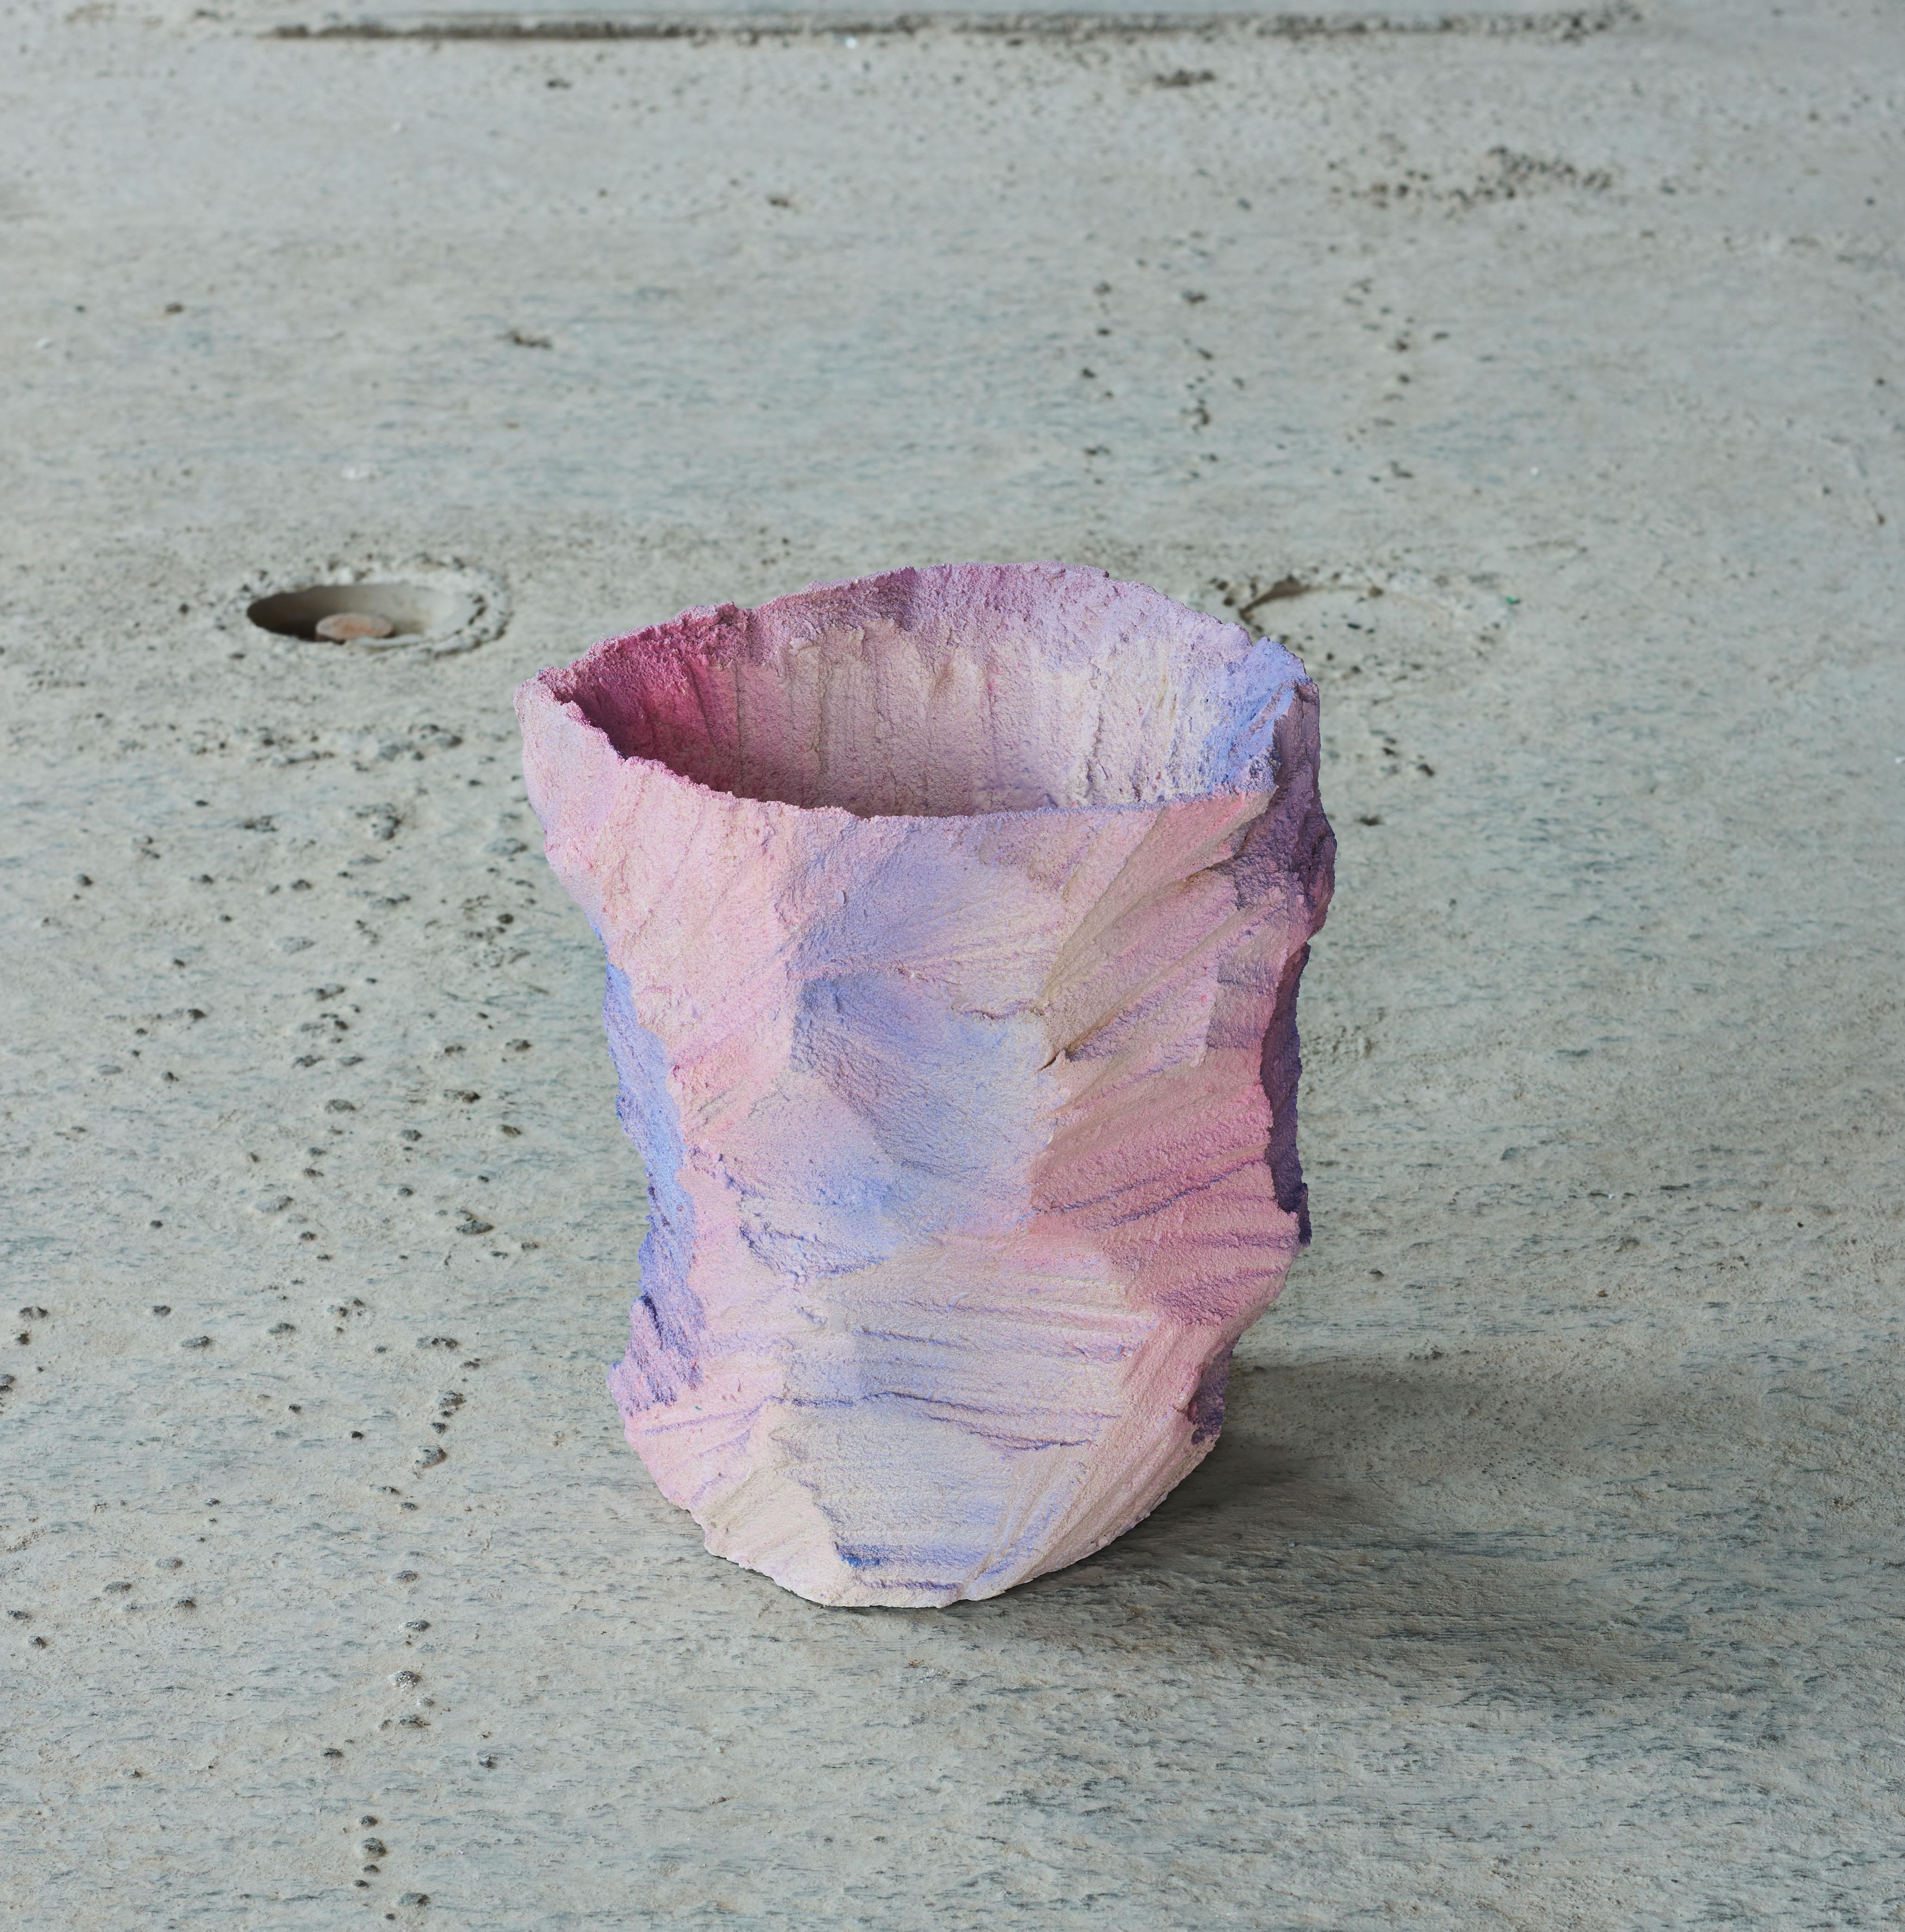 Crystal Rock vase by Andredottir & Bobek
Dimensions: D 40 x H 30 cm
Materials: Reused Foam/mattress and Jesmonite Hardner in Color Purple/Pink fade
 
Artificial Nature is a collaboration between the artist and design duo Josephine Andredottir and